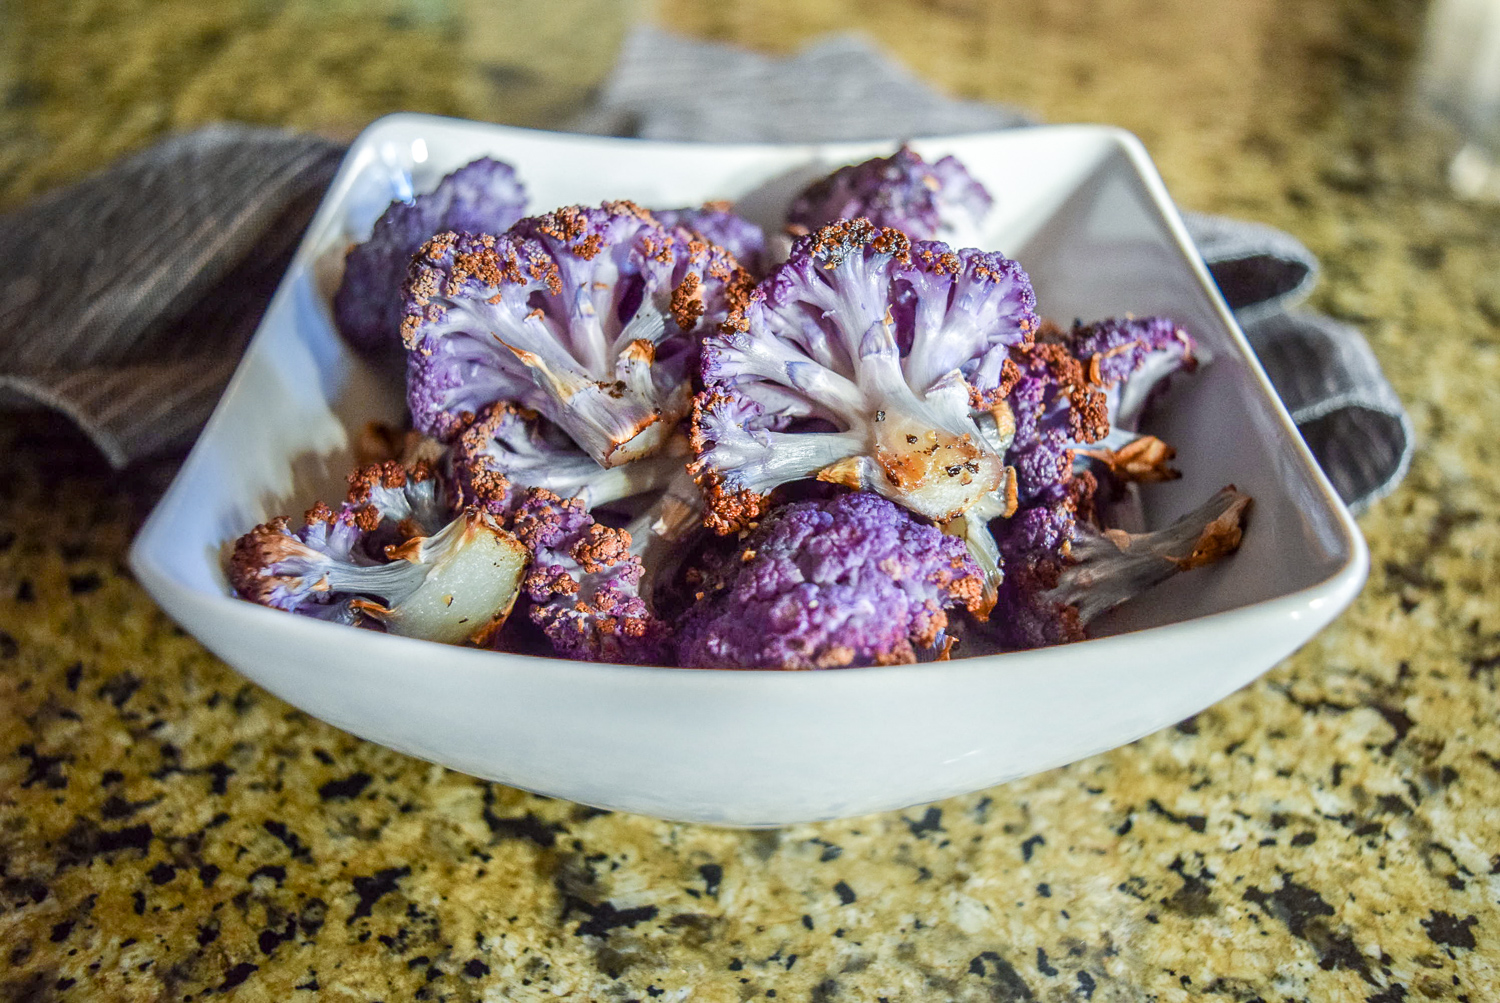 Finished roasted purple cauliflower florets from front